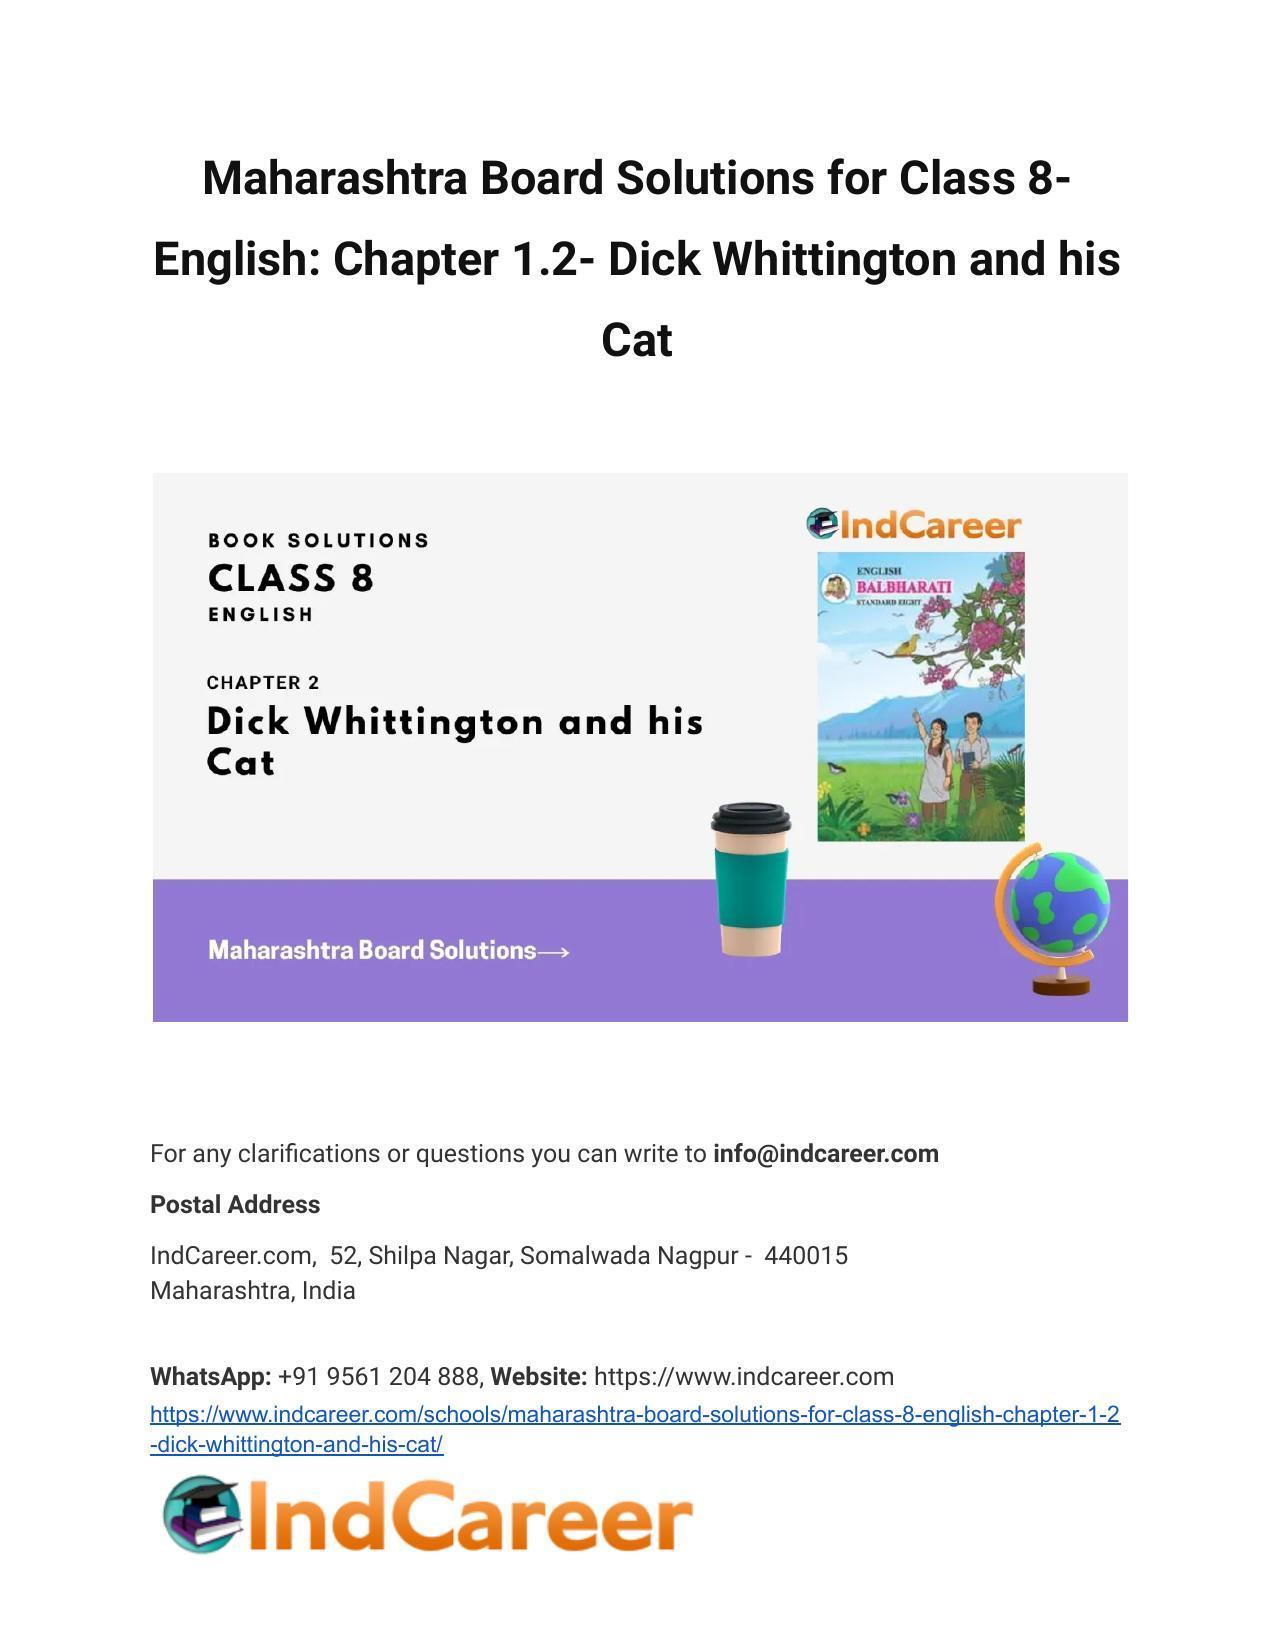 maharashtra-board-solutions-for-class-8-english-chapter-1-2-dick